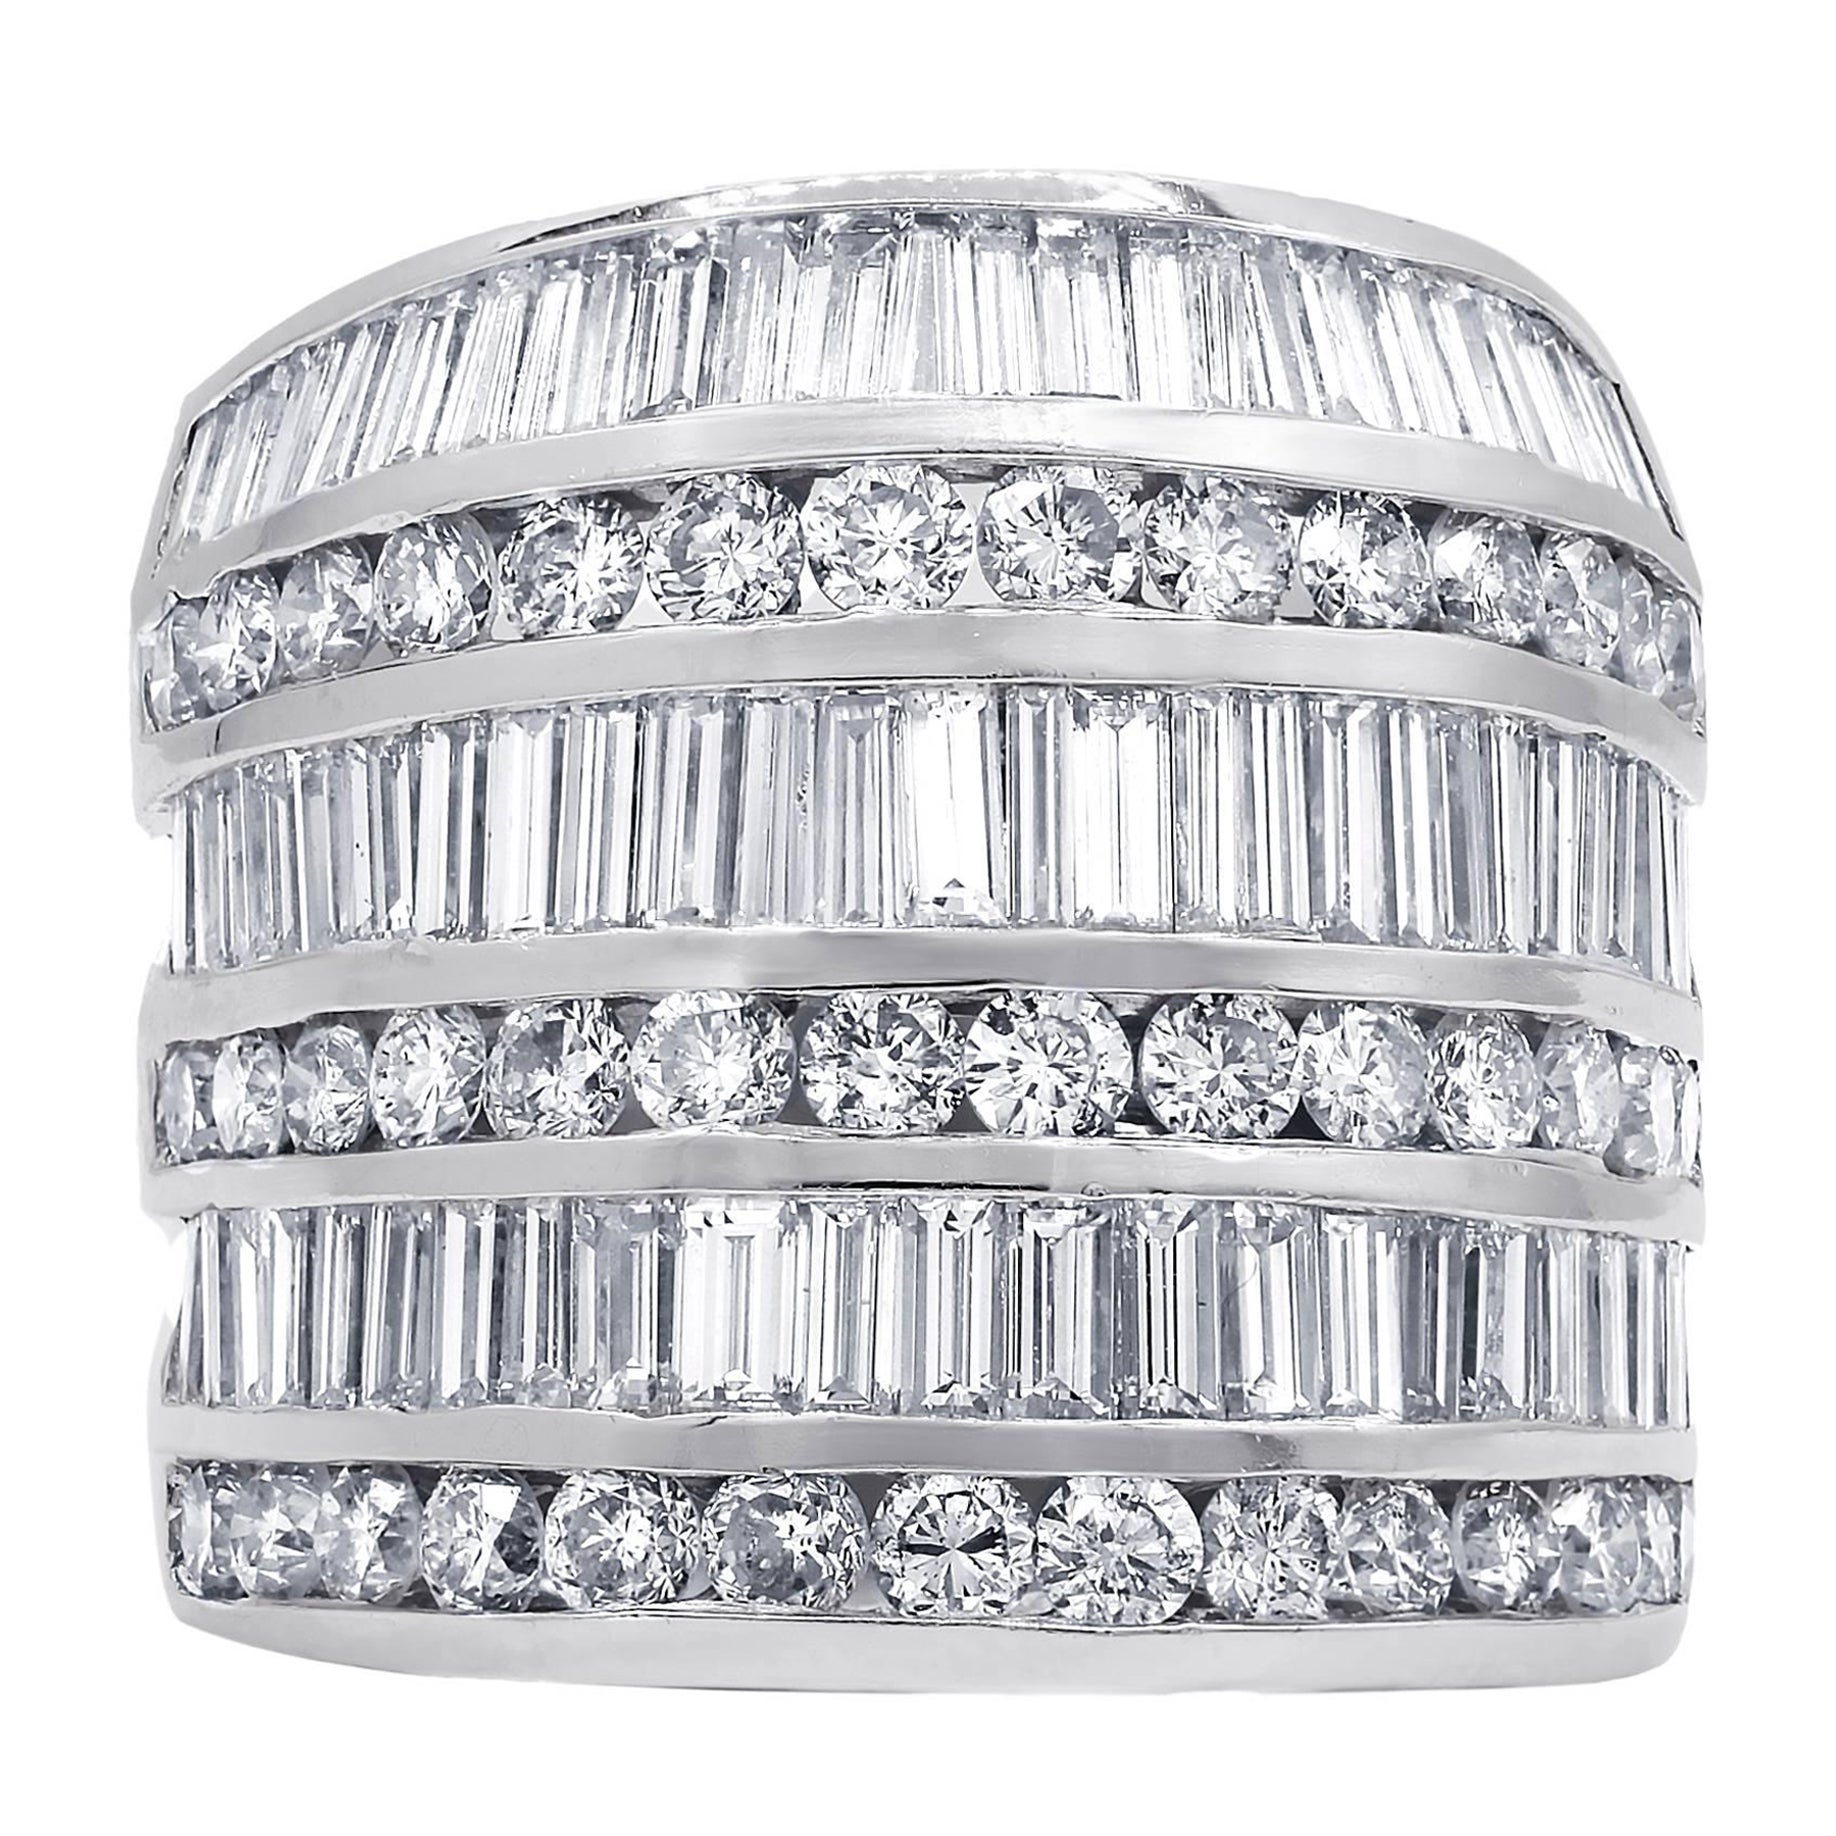 Diana M. 18 kt White Gold Diamond Fashion Ring Adorned With Alternating Rows  For Sale